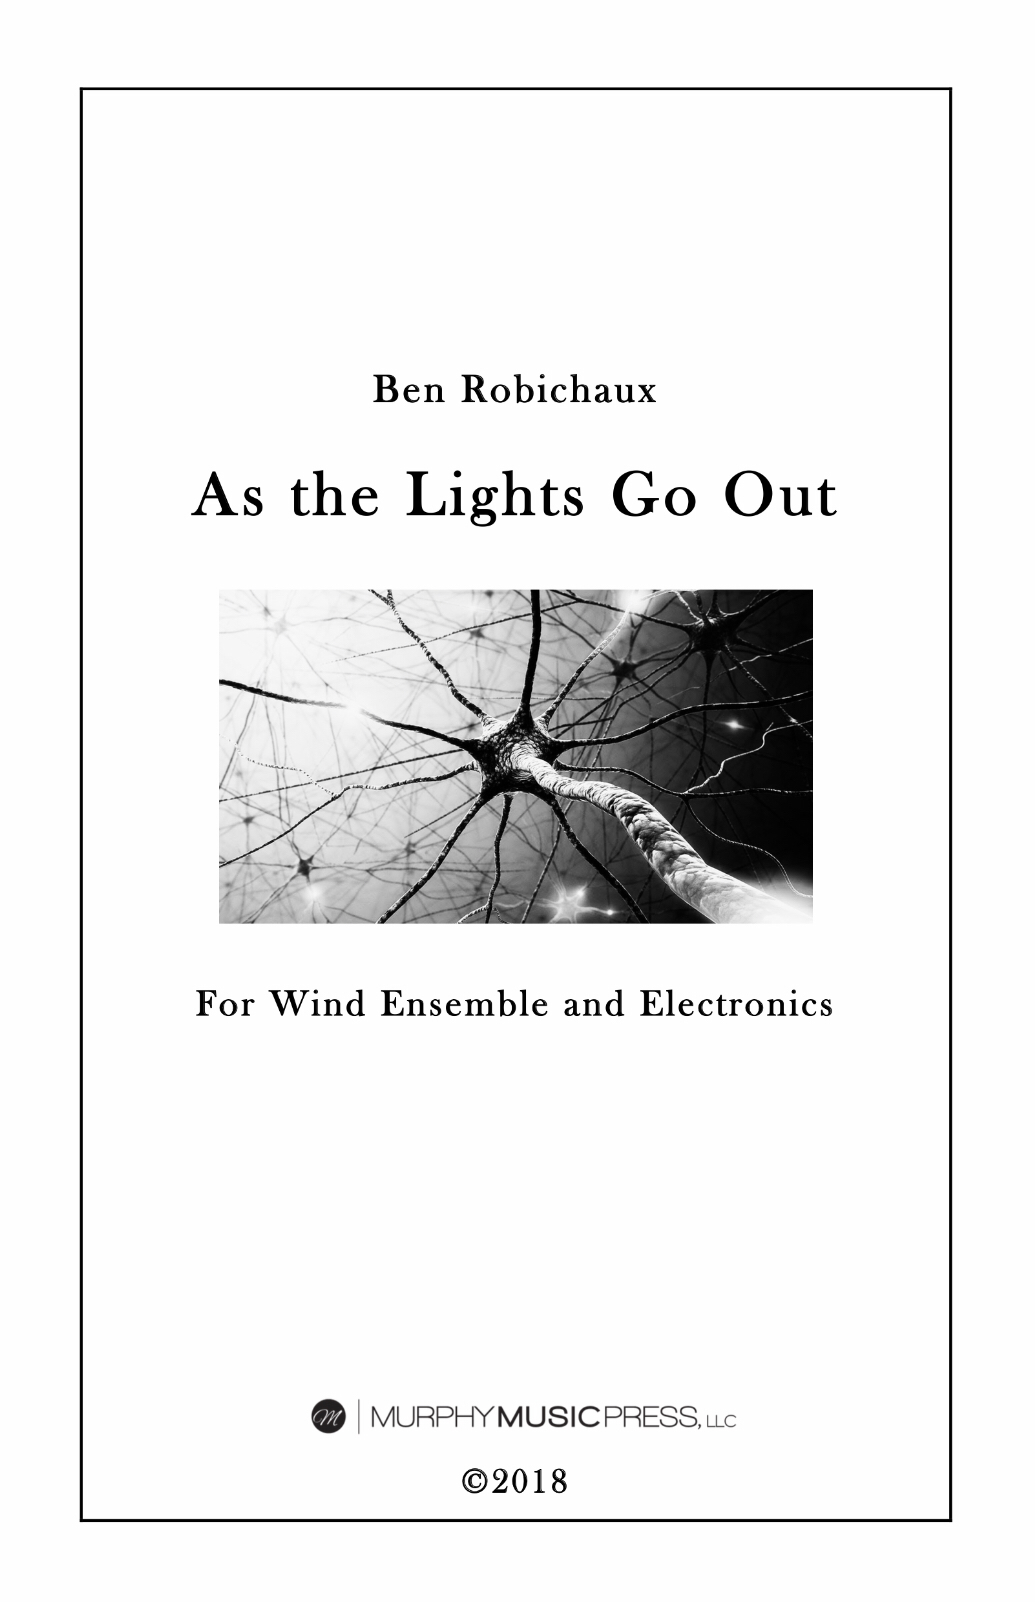 As The Lights Go Out by Ben Robichaux